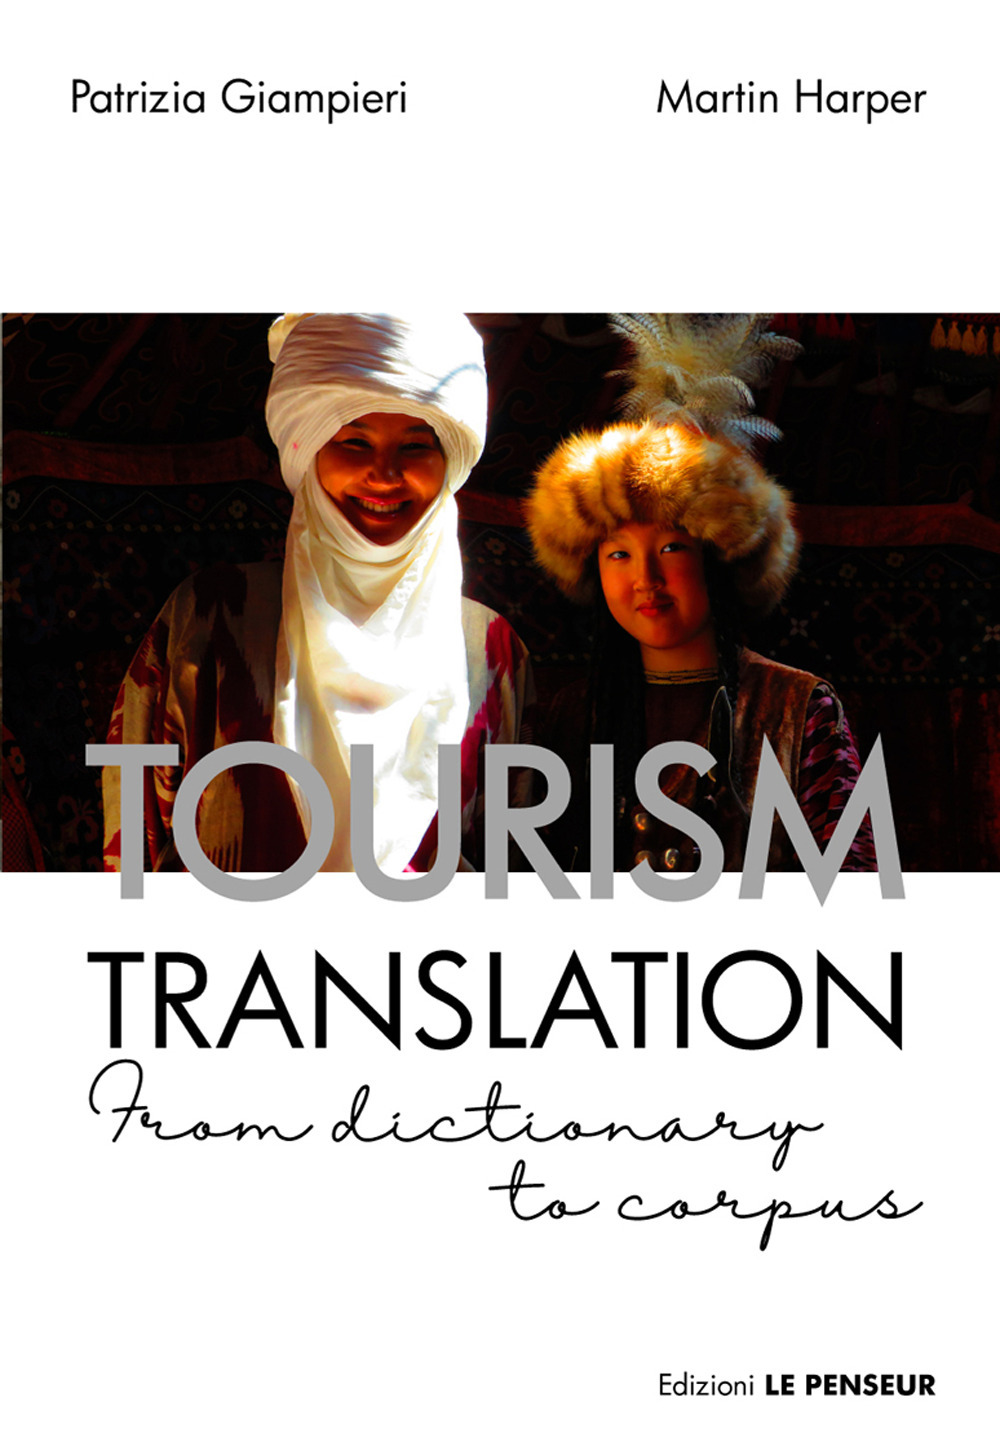 Tourism translation. From dictionary to corpus